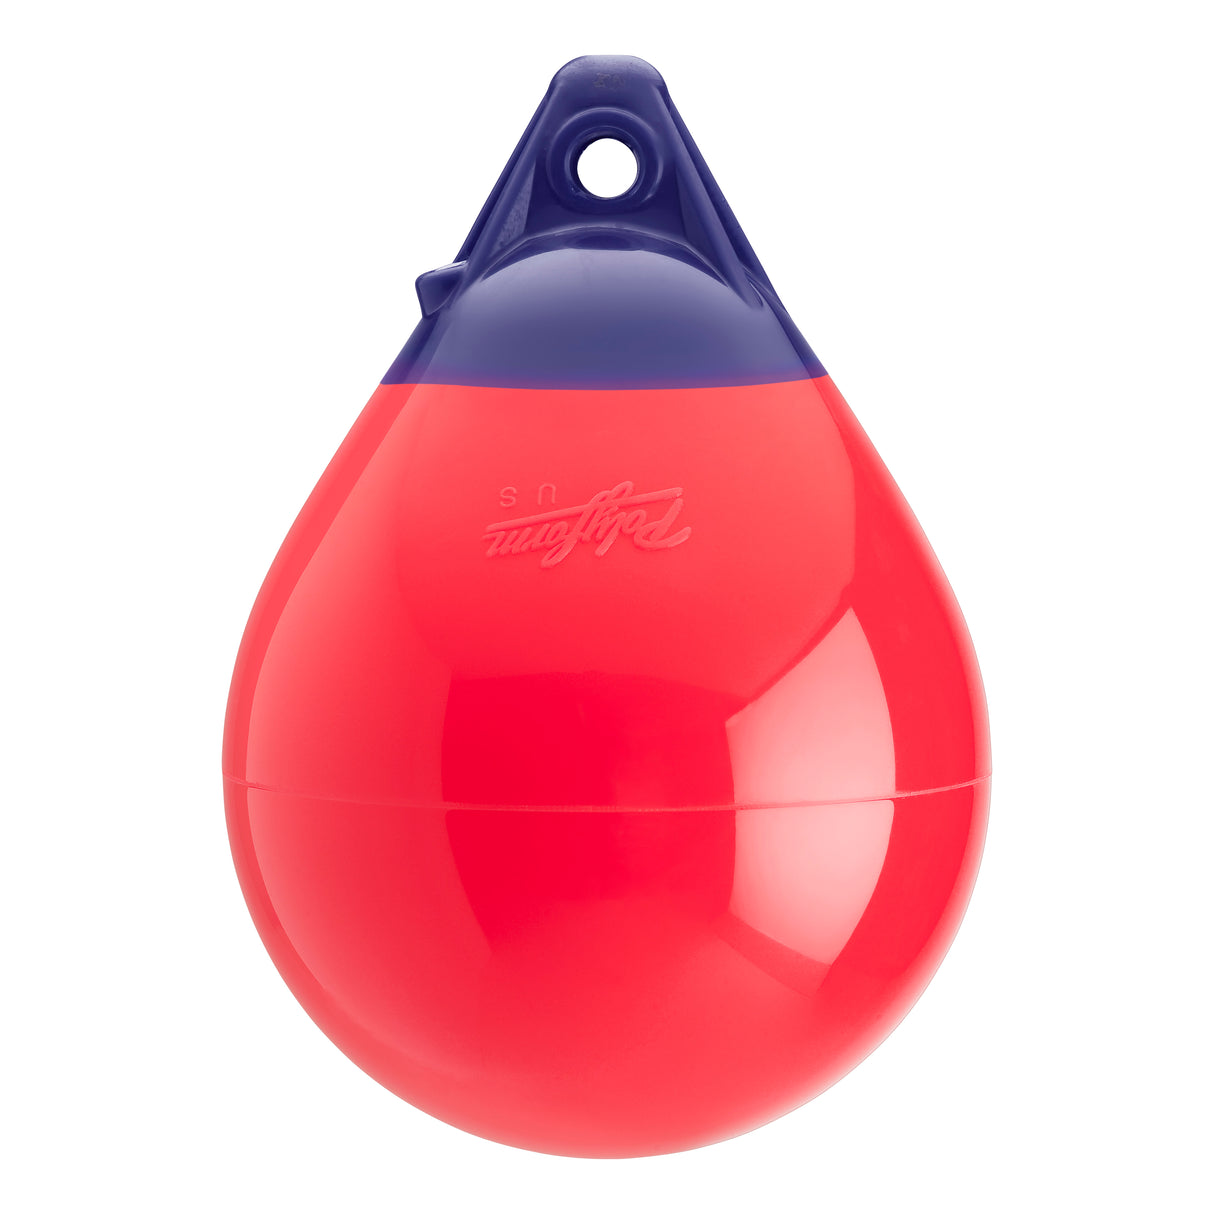 Red inflatable buoy, Polyform A-0 